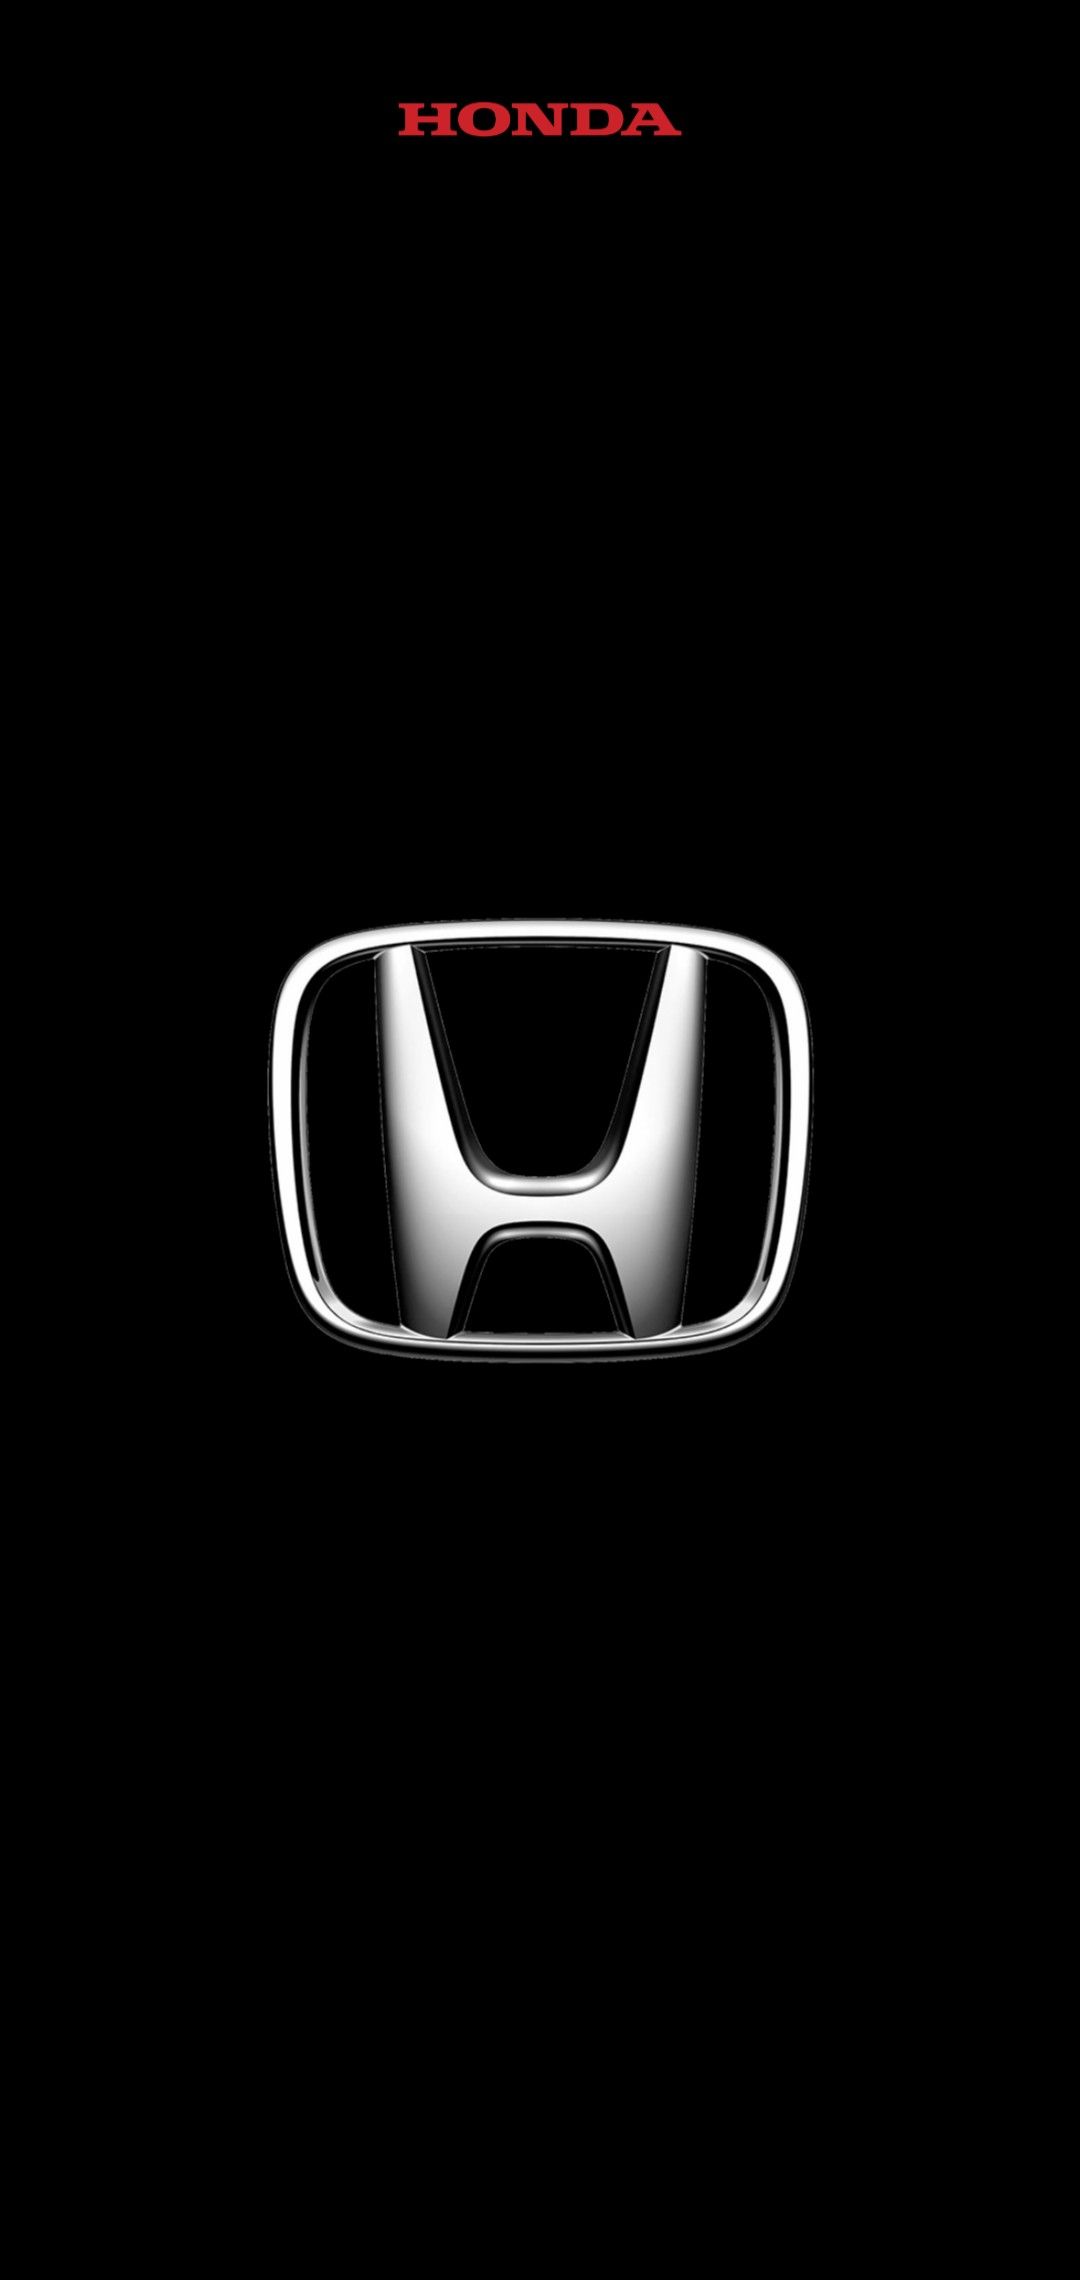 Download Honda wallpapers for mobile phone free Honda HD pictures